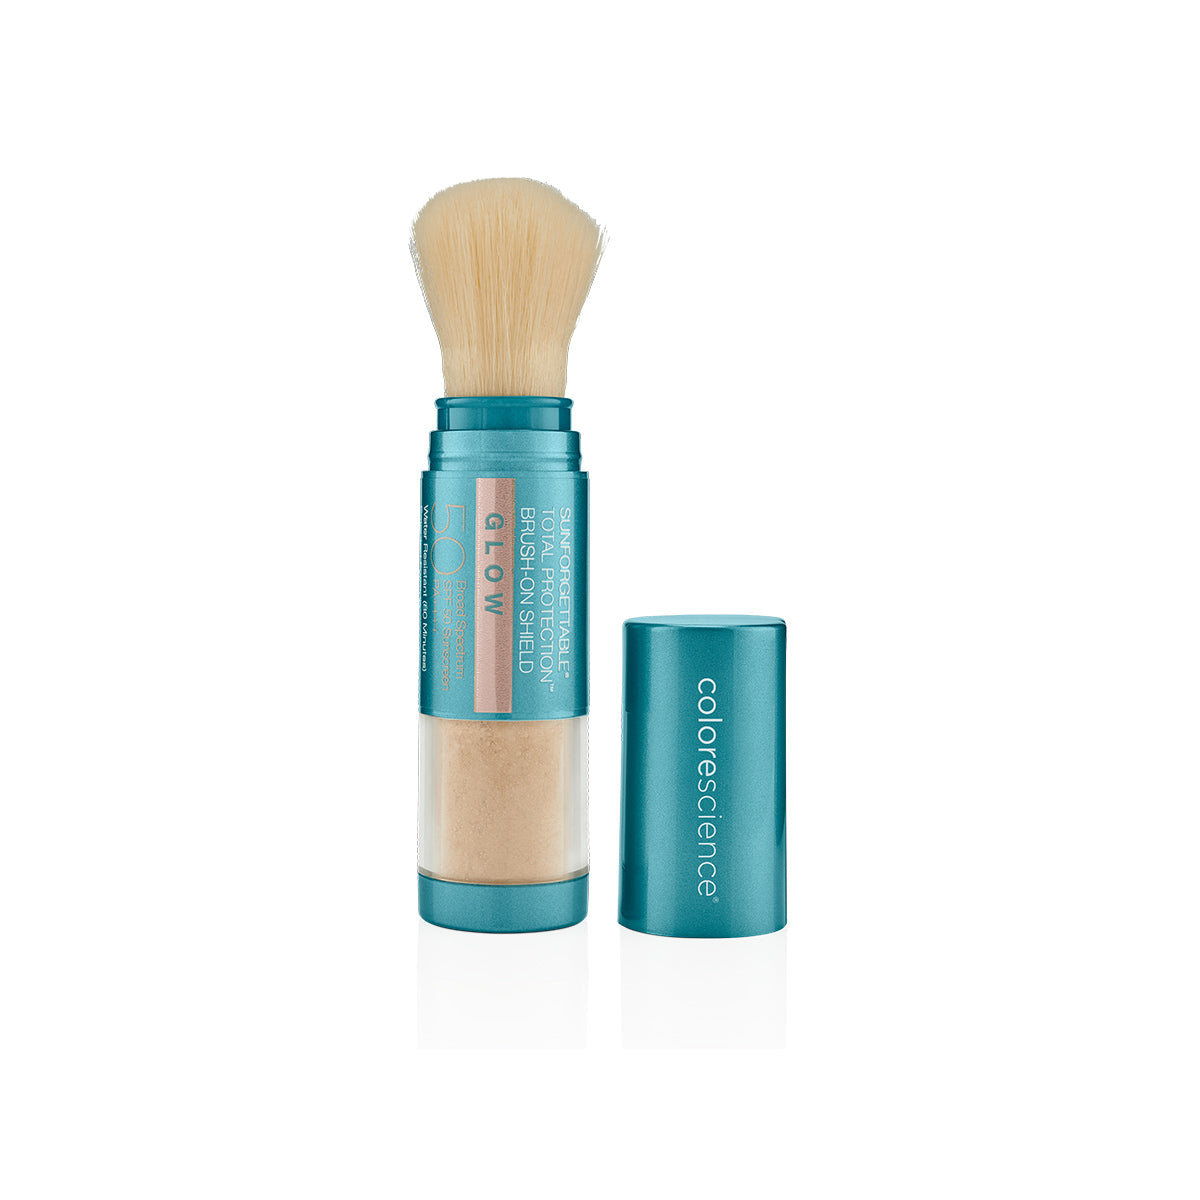 COLORSCIENCE SUNFORGETTABLE TOTAL PROTECTION GLOW SPF 30 BROCHA PROTECTORA SOLAR | The Glow Shop